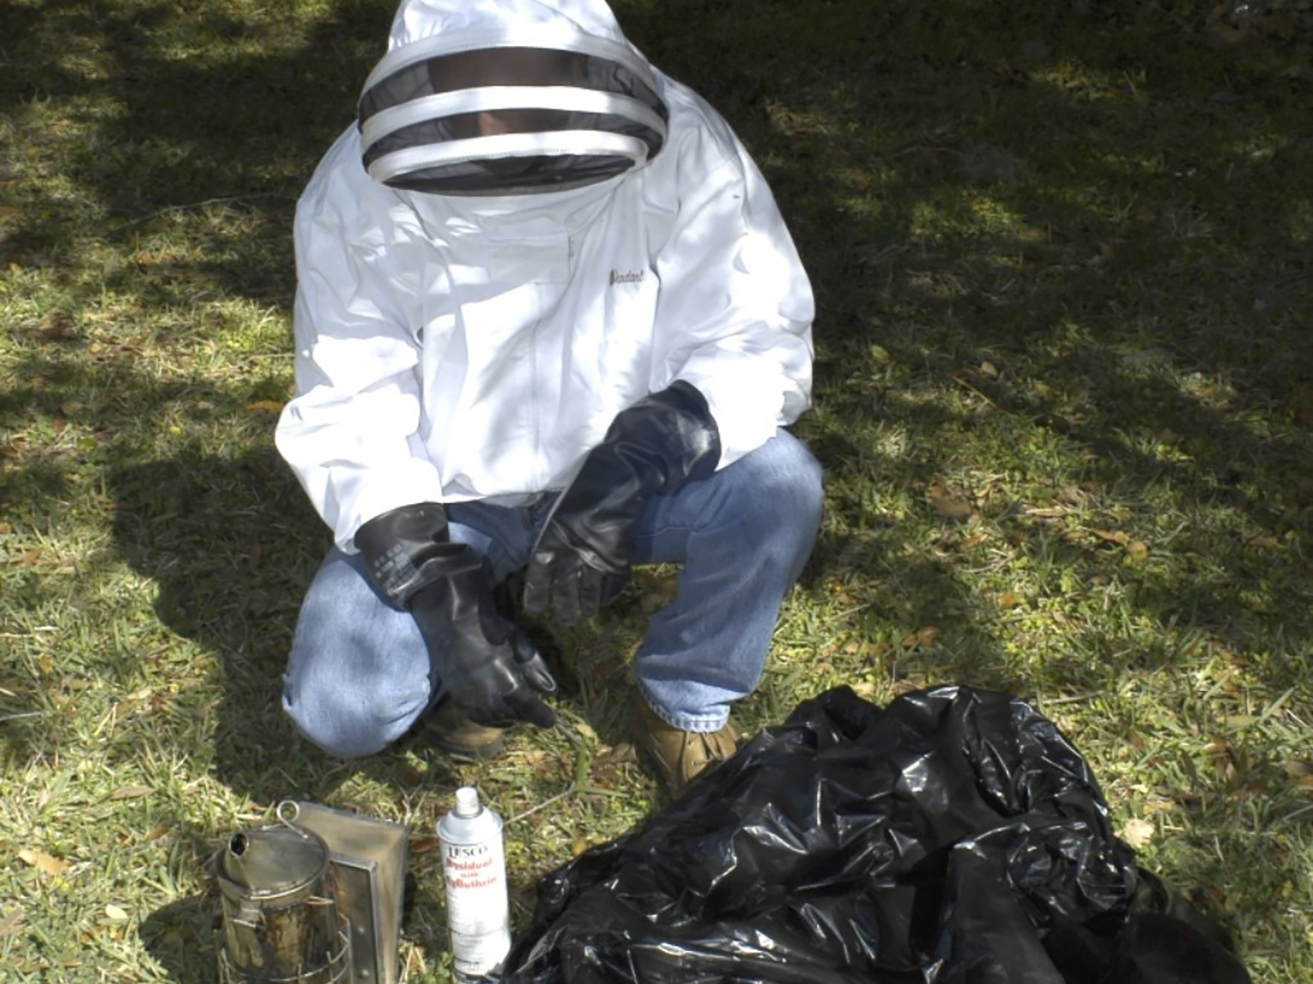 Fig. 10. Bee removal or control requires special safety equipment used by professionals.